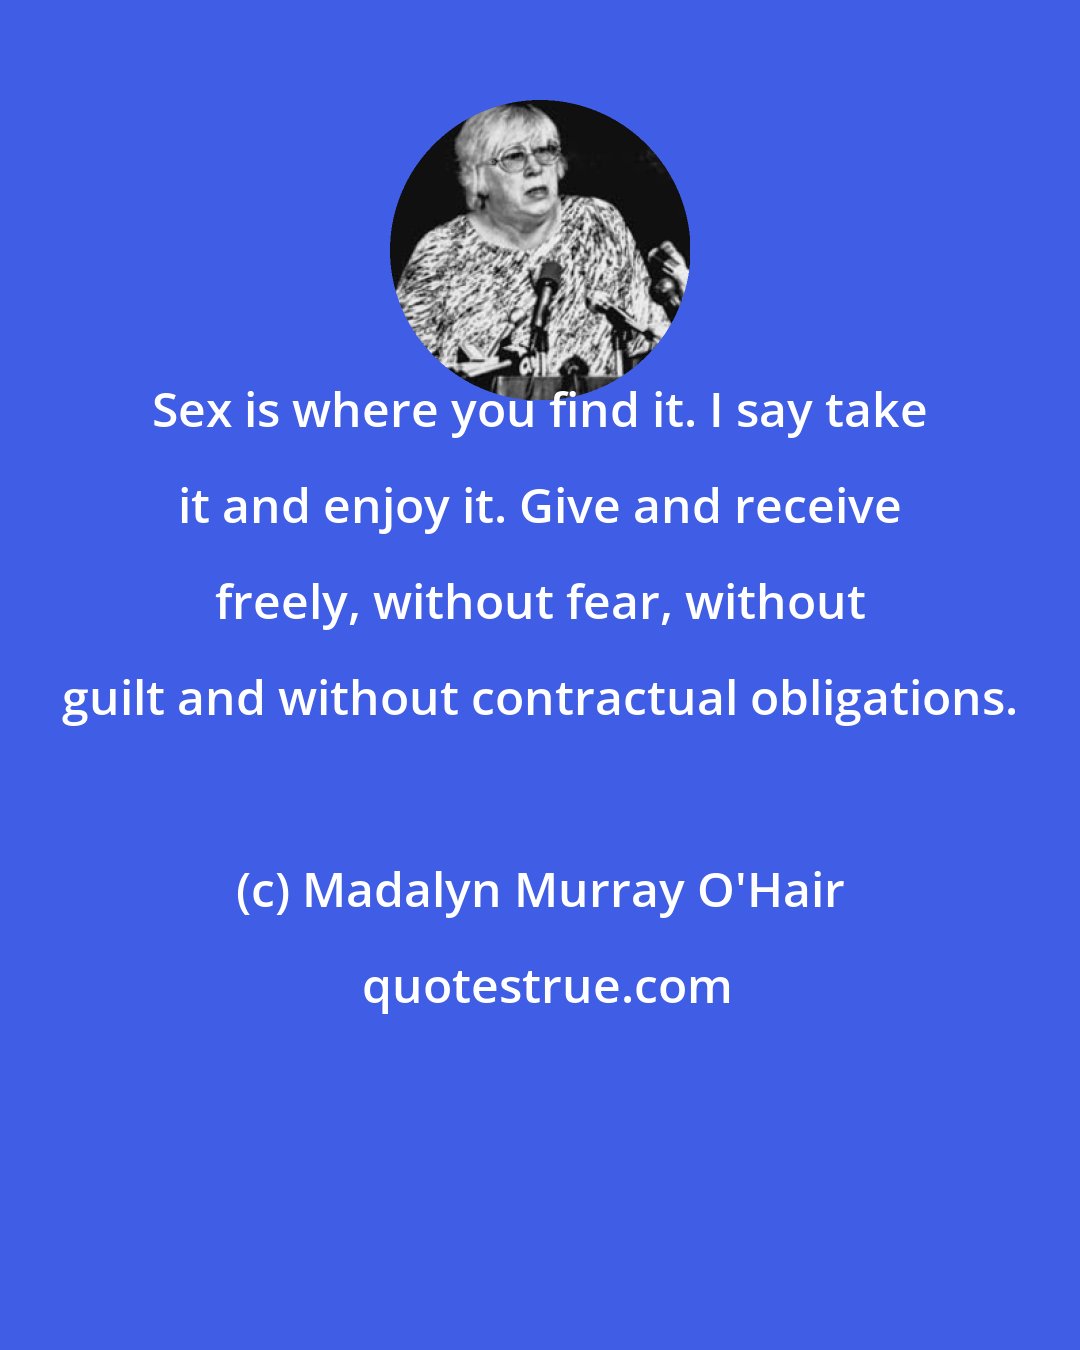 Madalyn Murray O'Hair: Sex is where you find it. I say take it and enjoy it. Give and receive freely, without fear, without guilt and without contractual obligations.